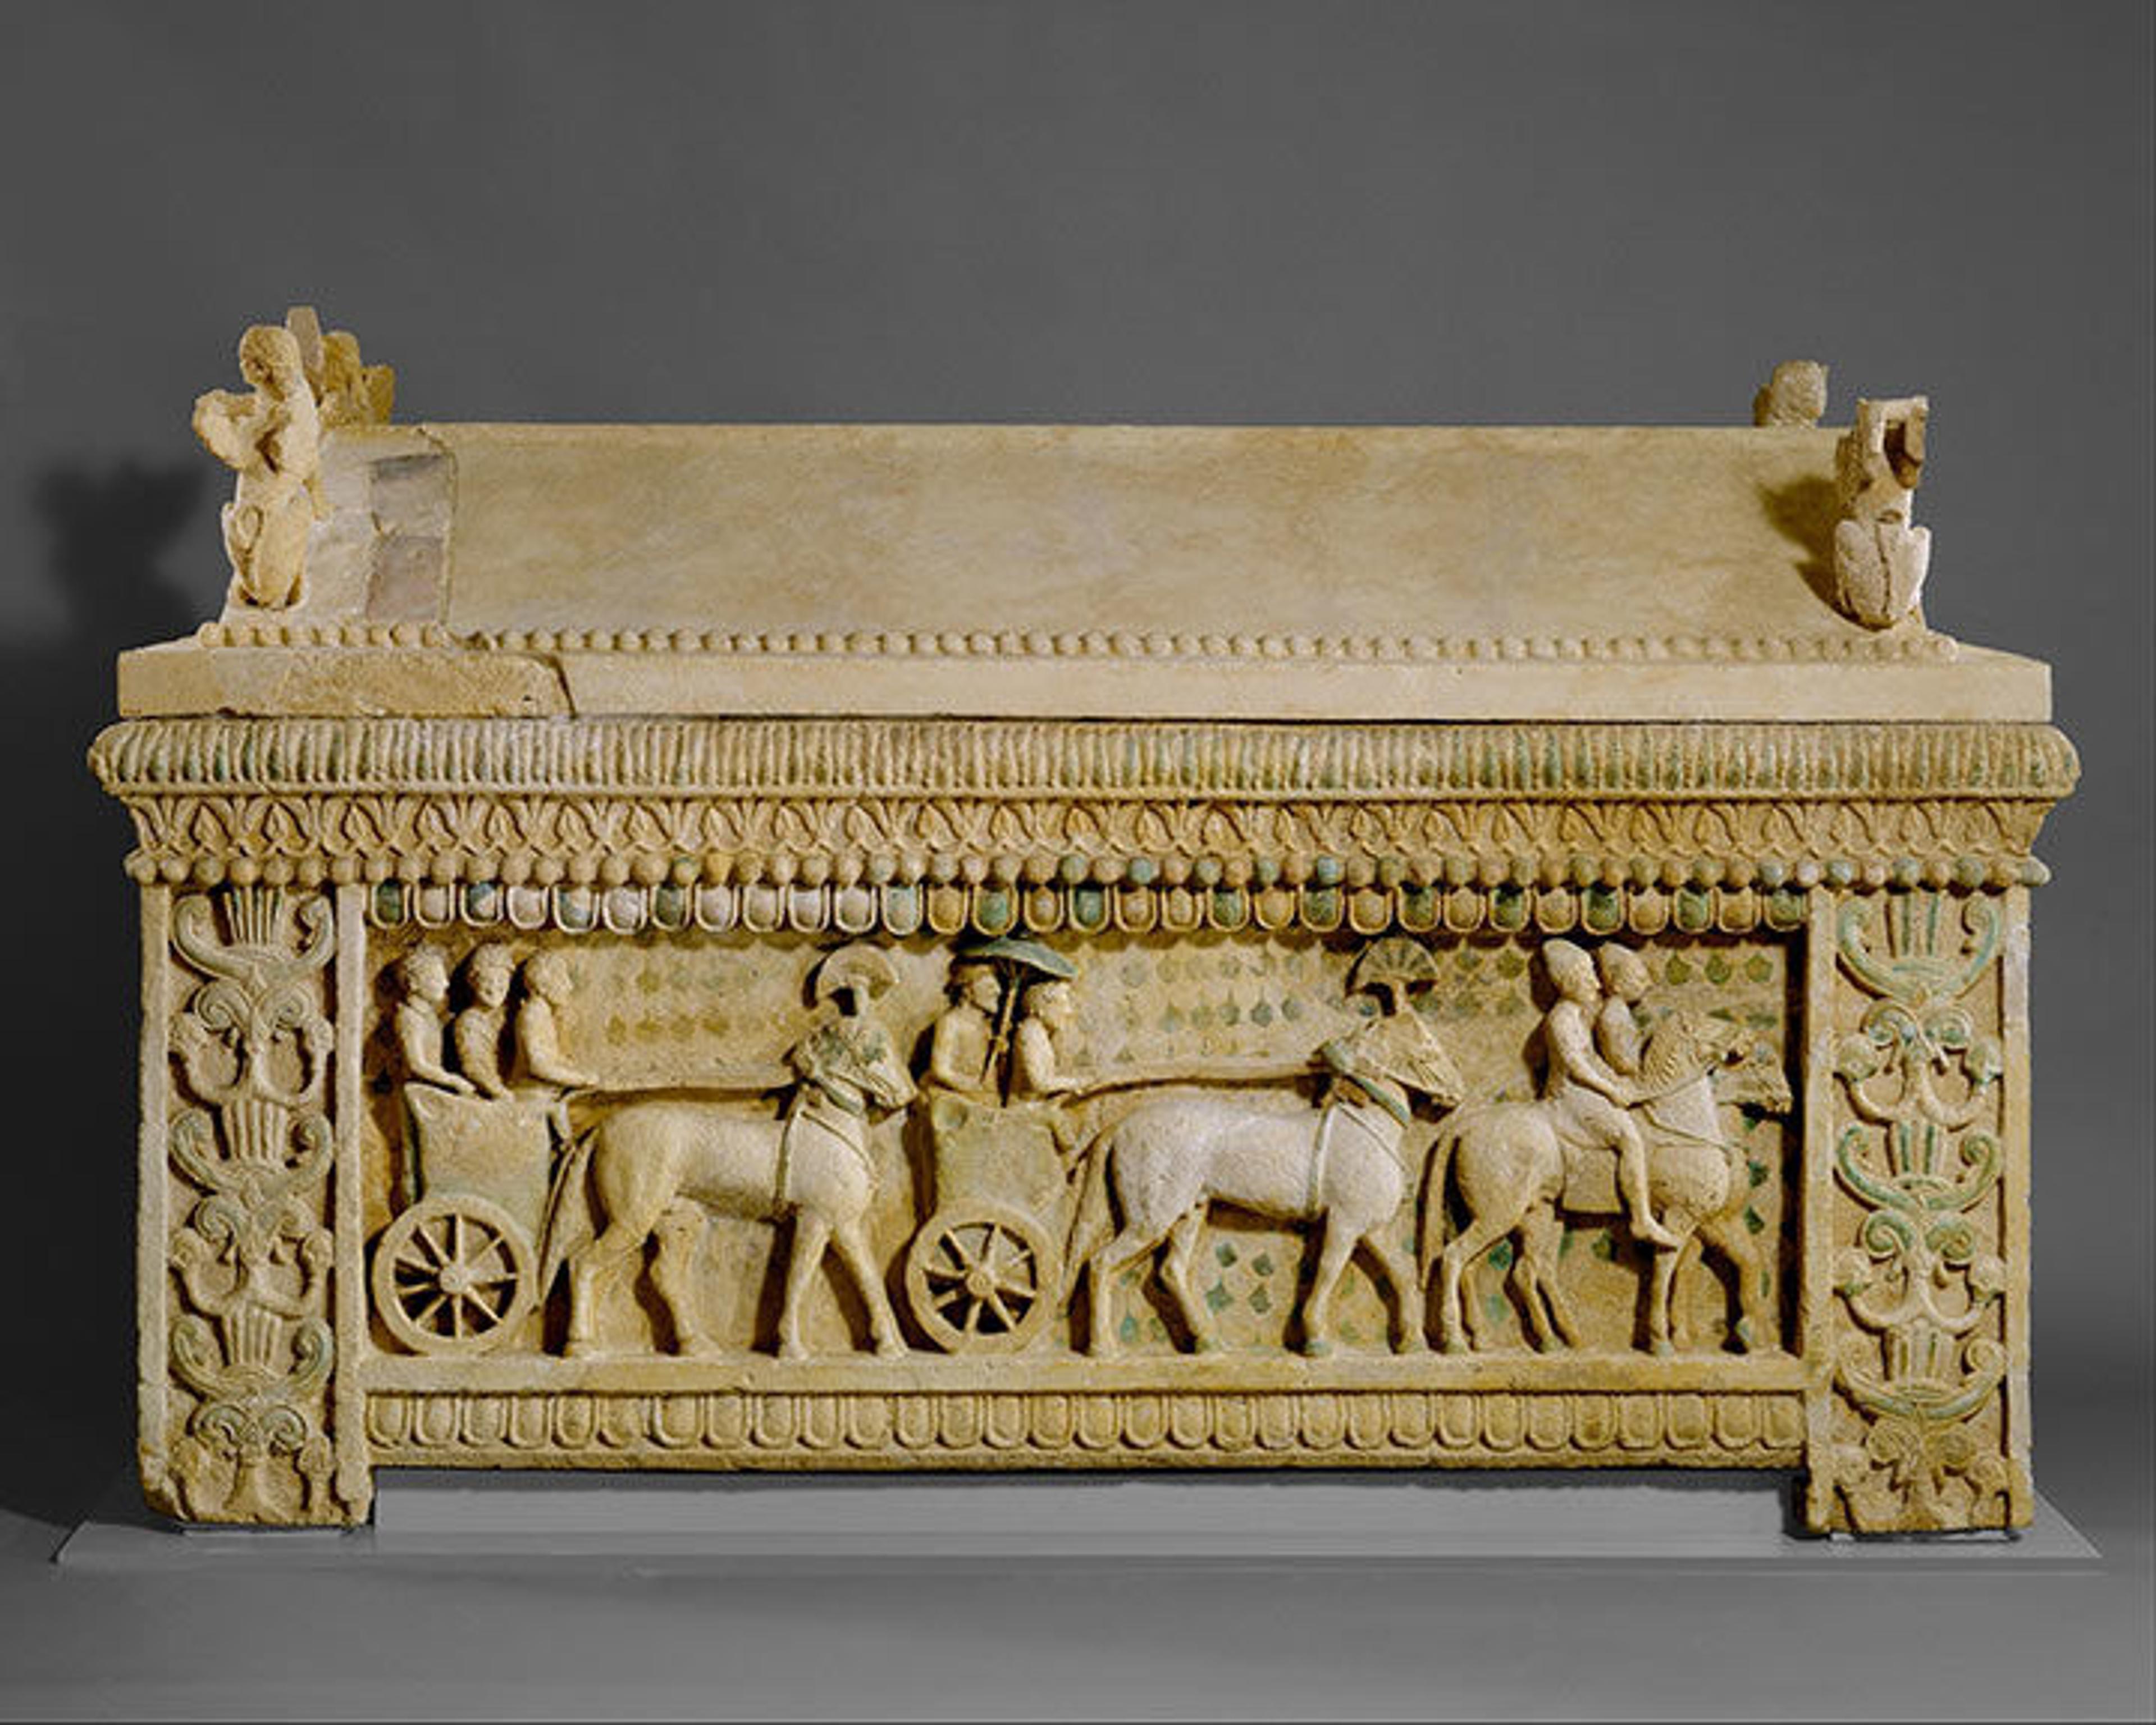 Limestone sarcophagus from the 5th century BC carved with horses pulling chariots